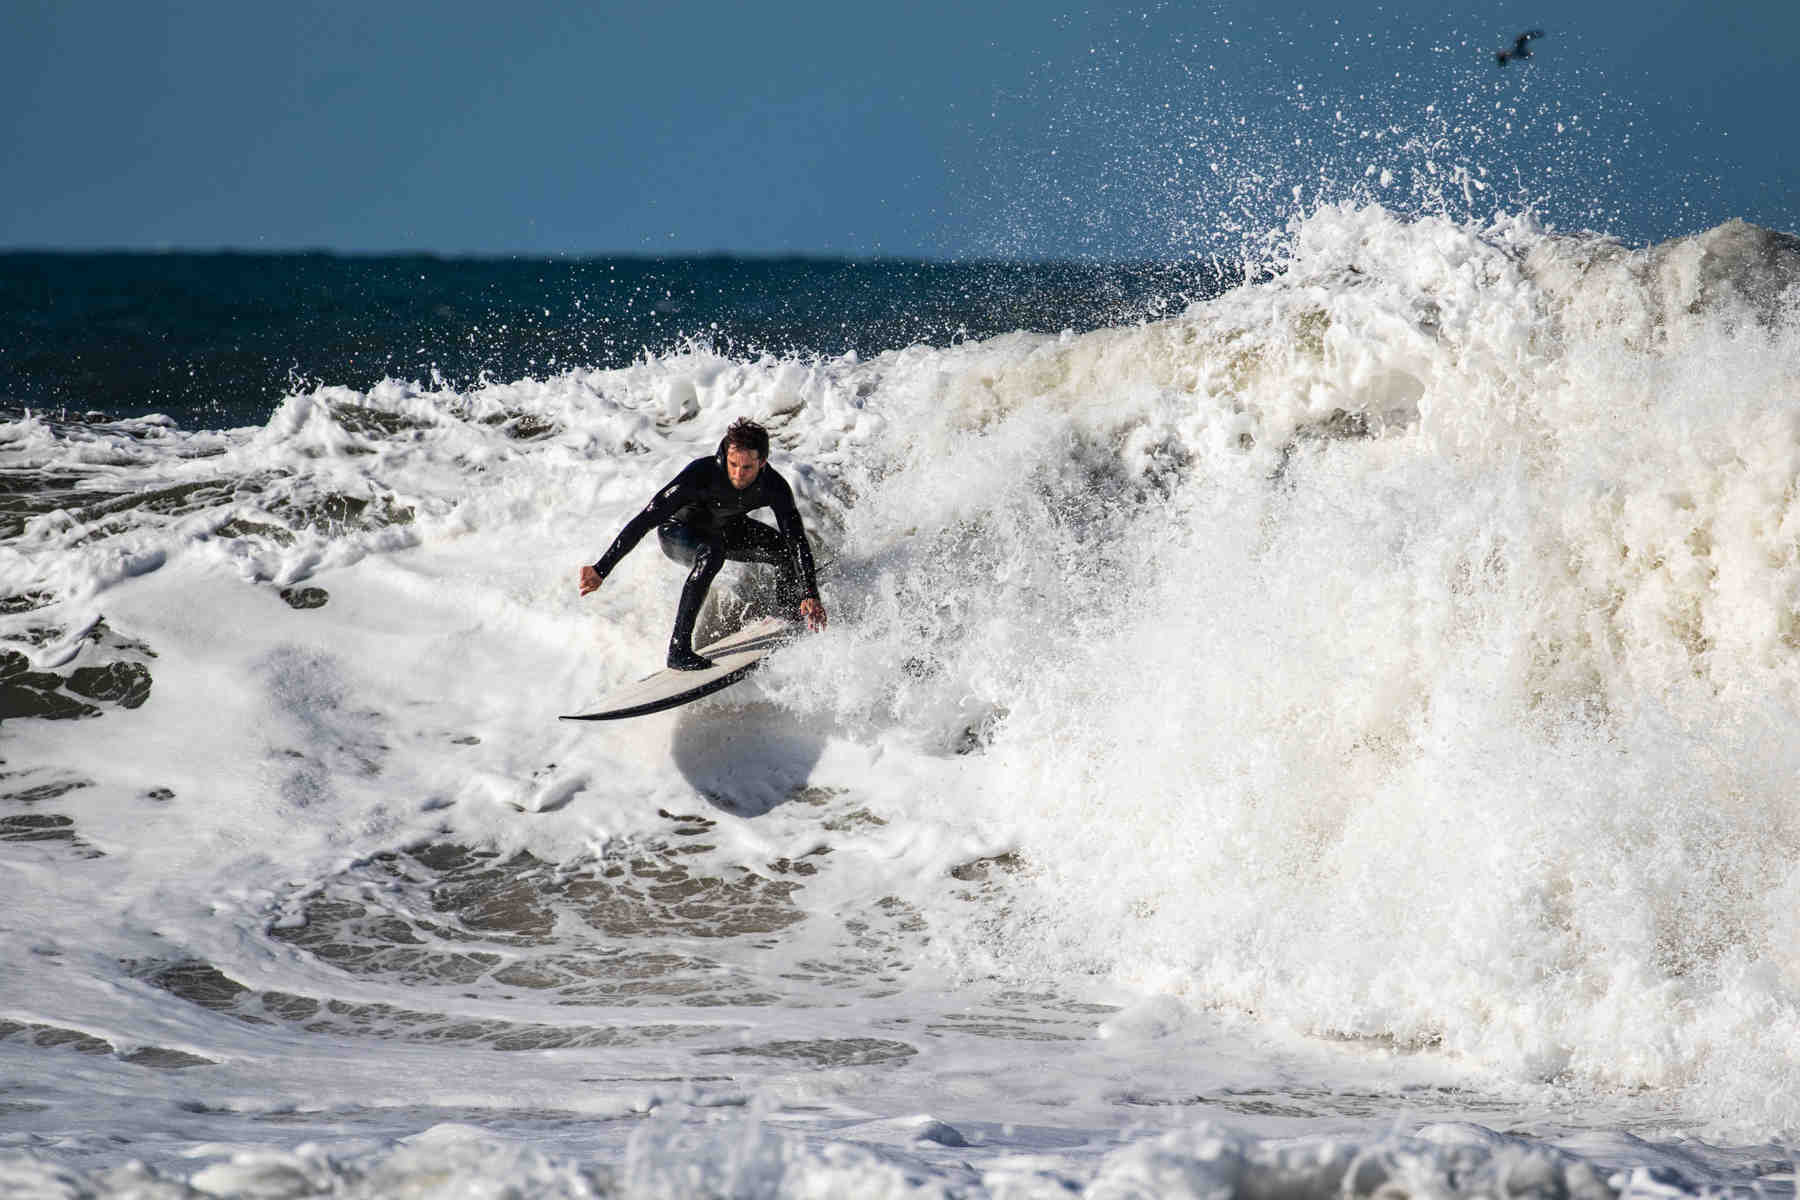 Can you be naturally good at surfing?